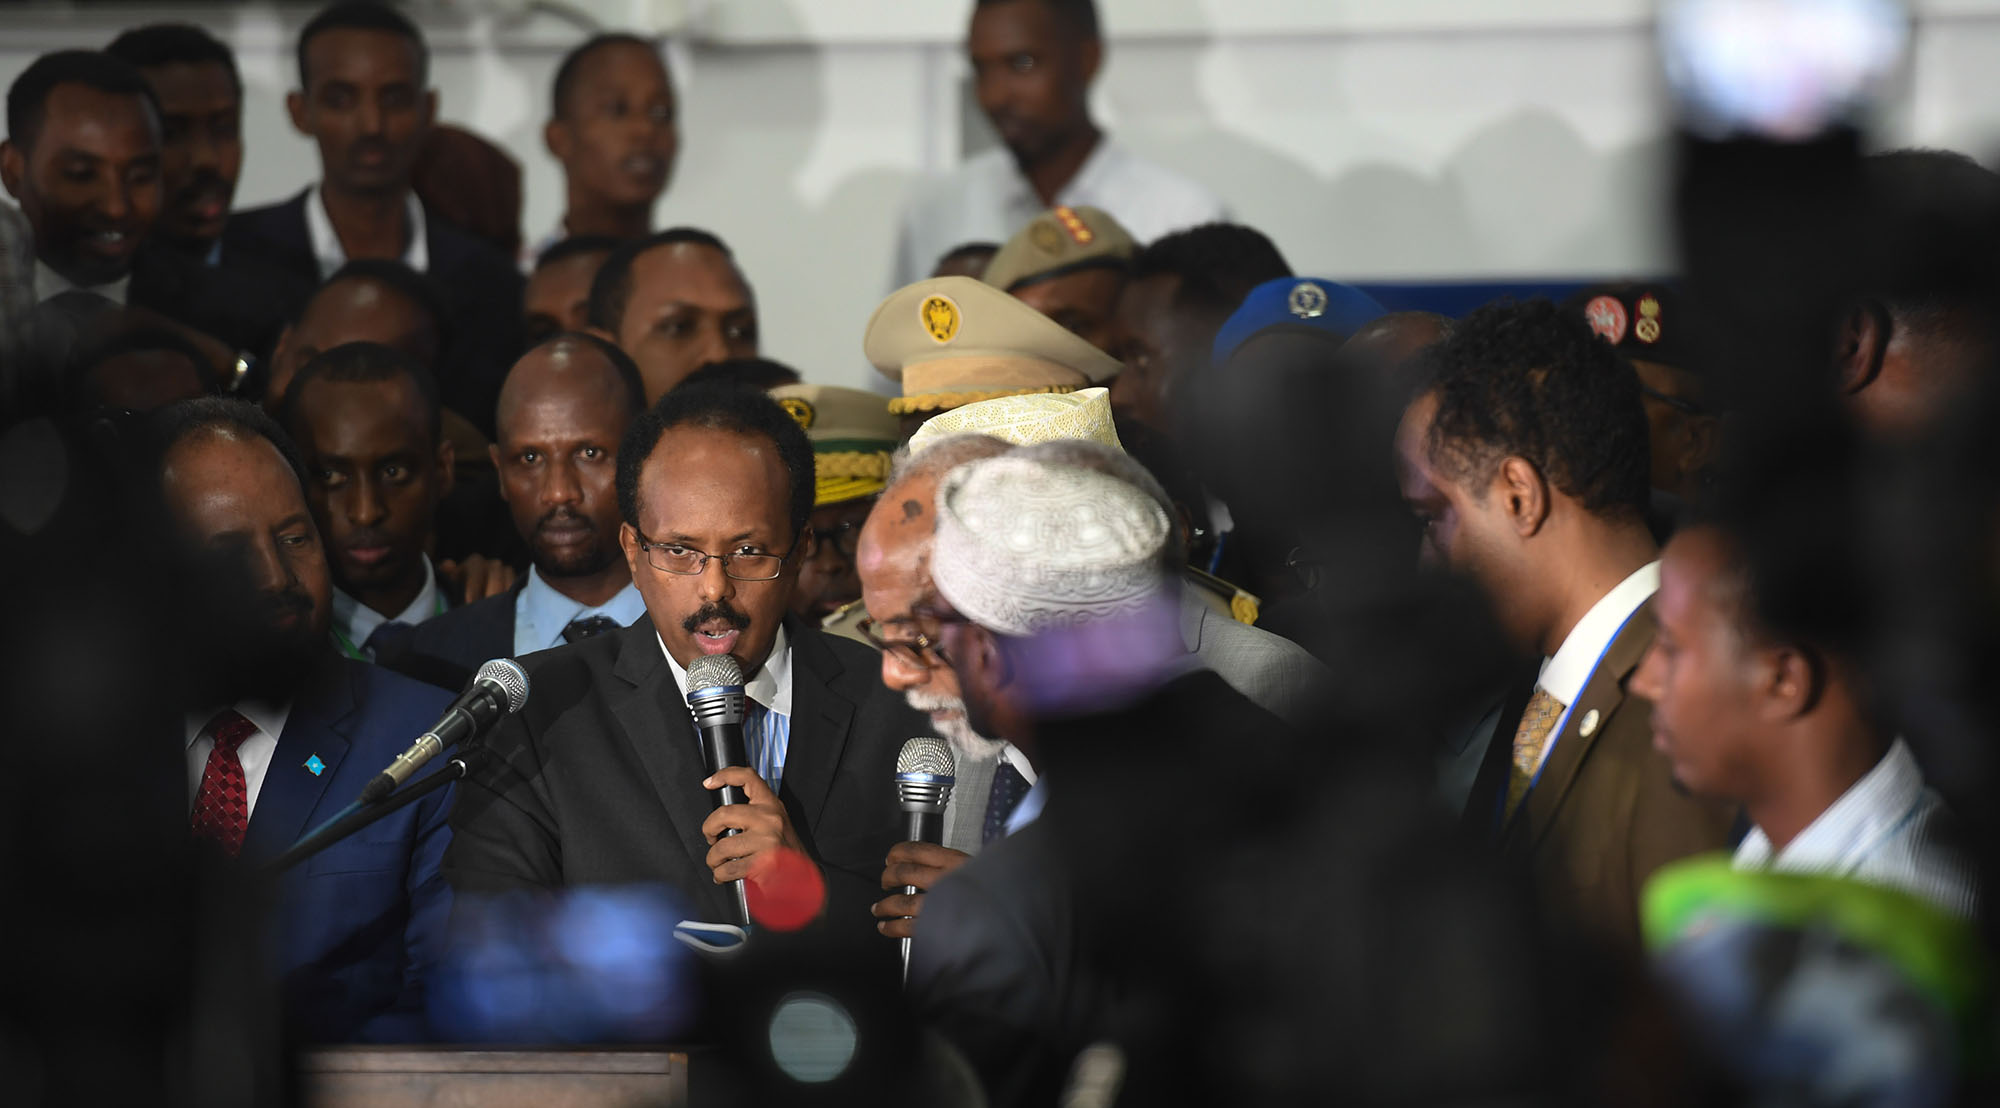 The Somali Election: challenges ahead